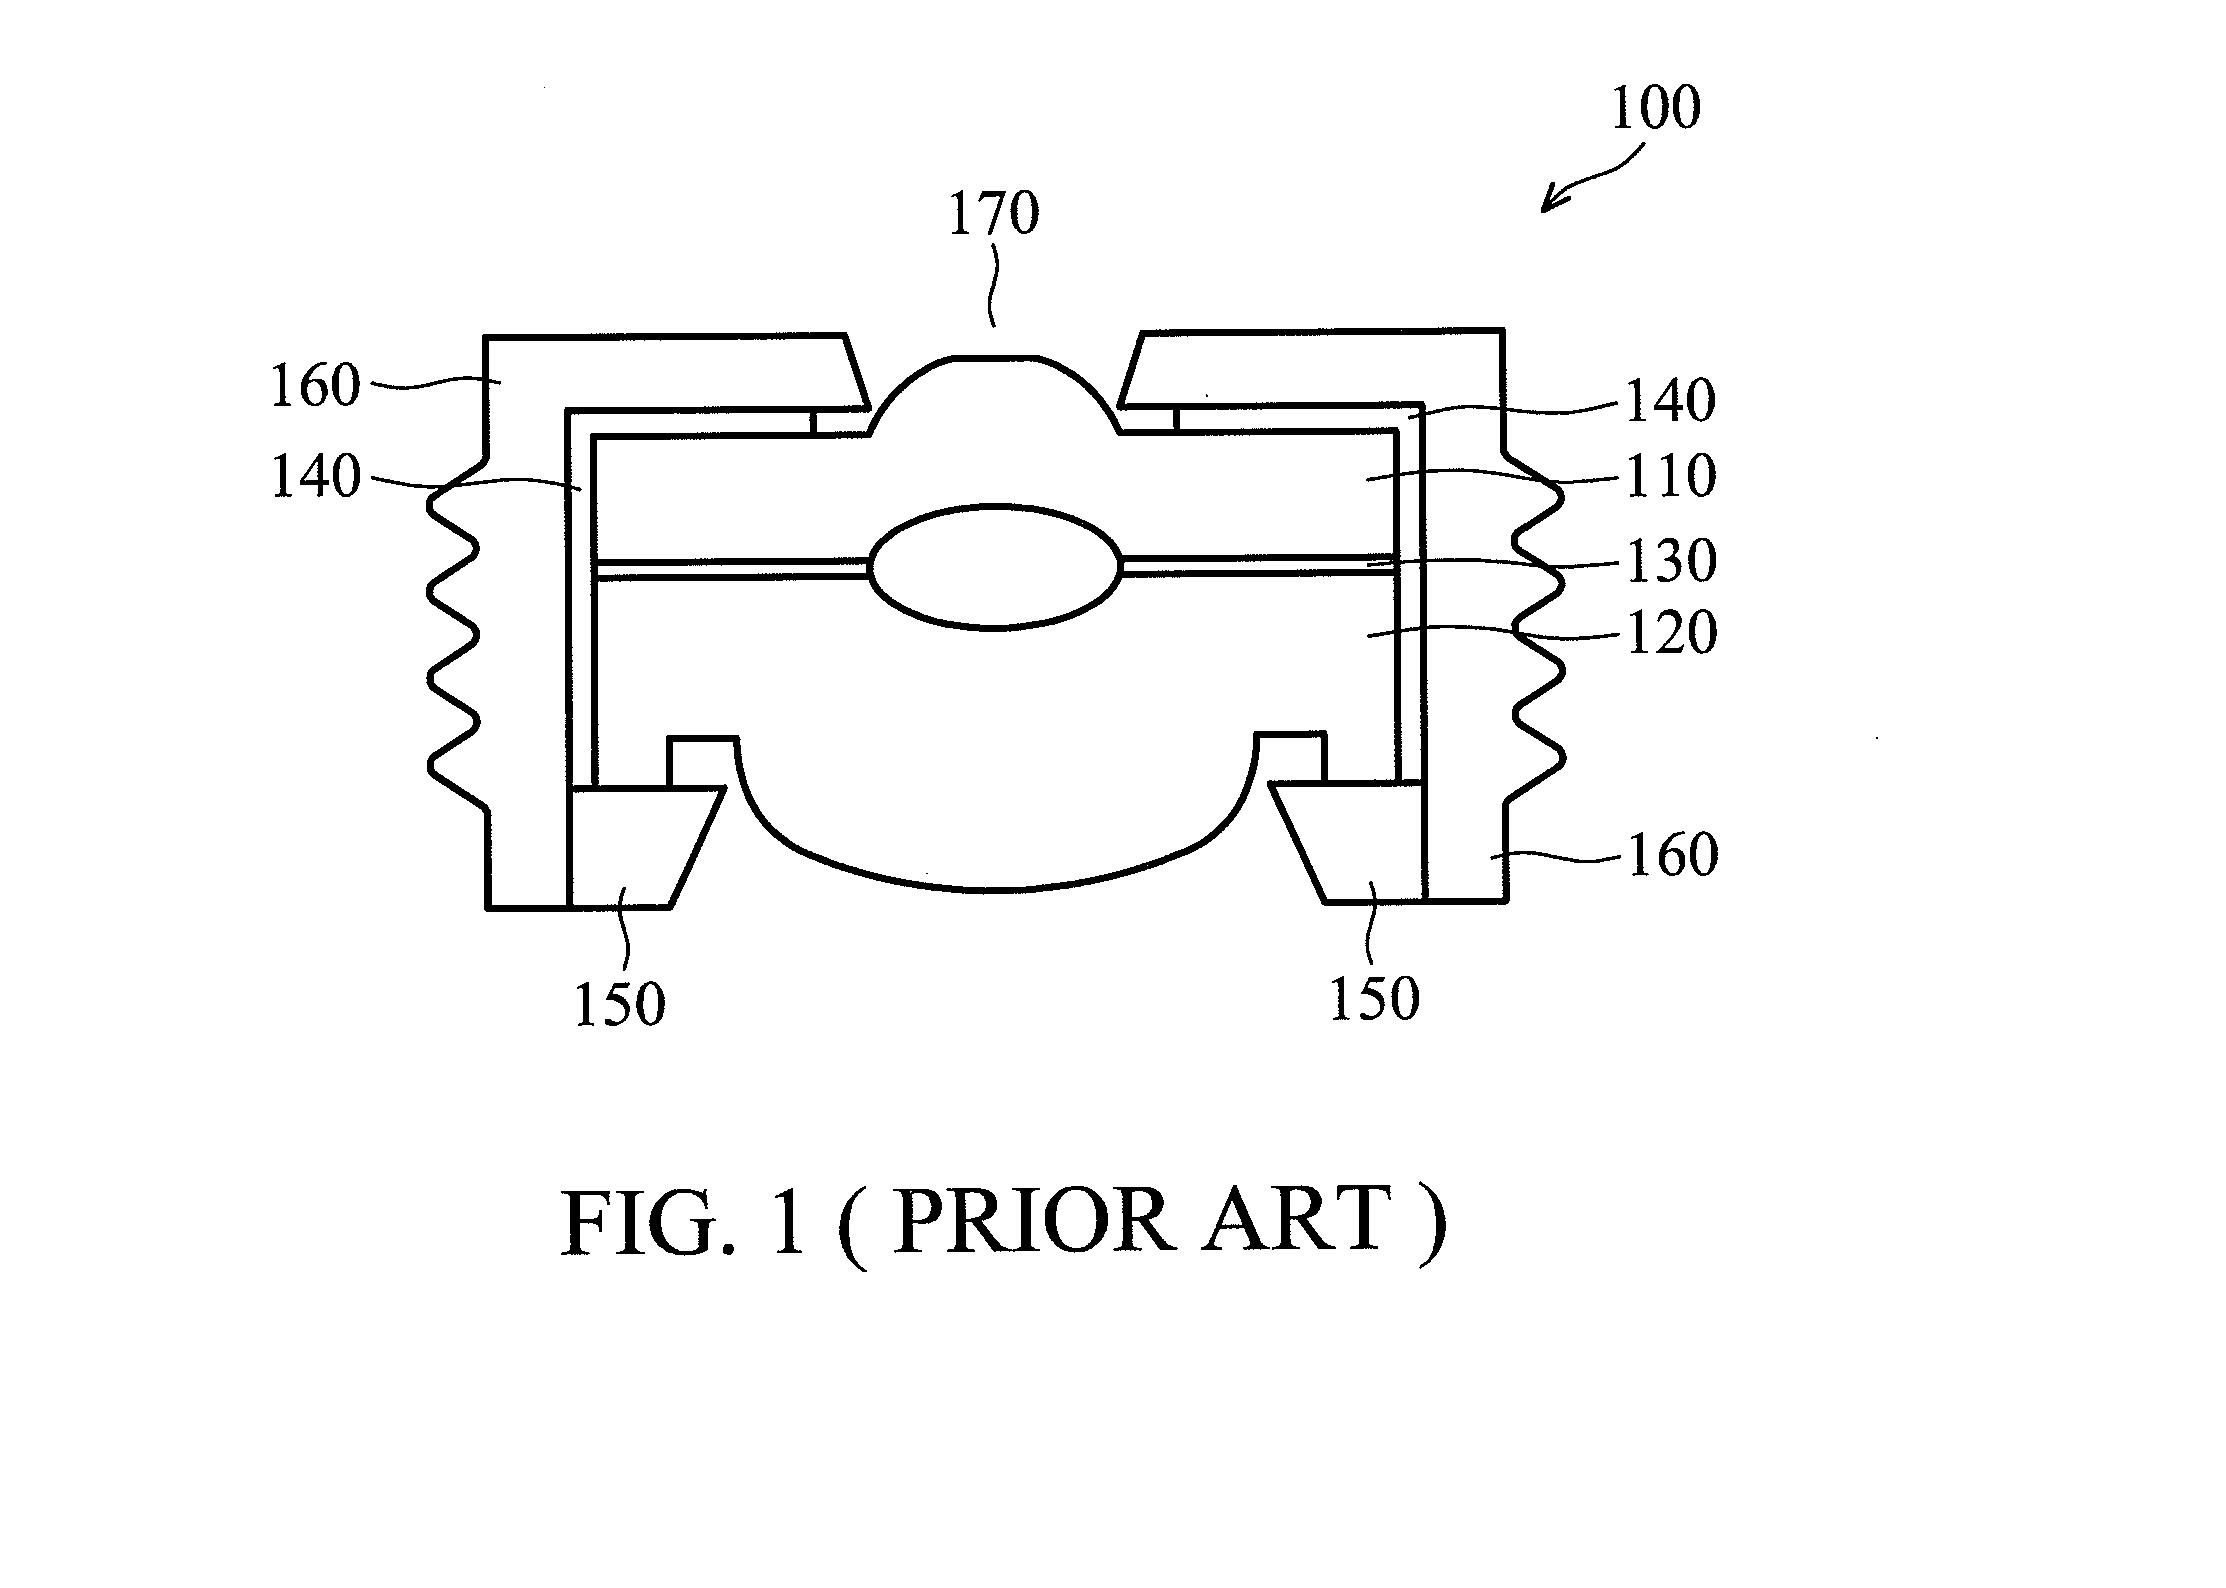 Image capture lens module and wafer level packaged image capture devices